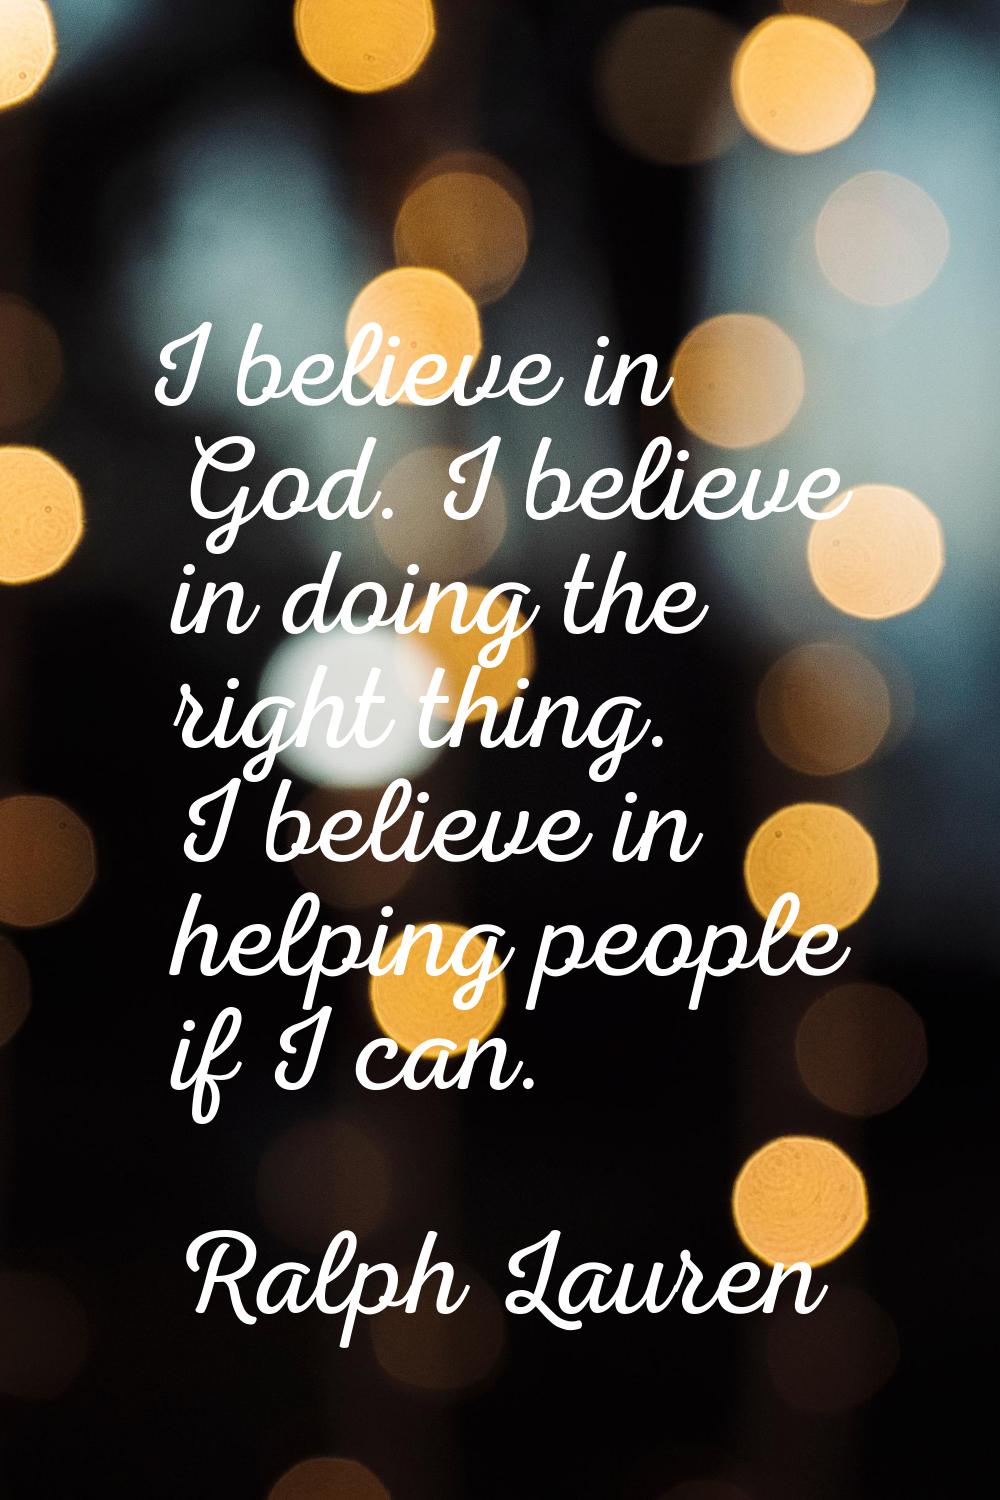 I believe in God. I believe in doing the right thing. I believe in helping people if I can.